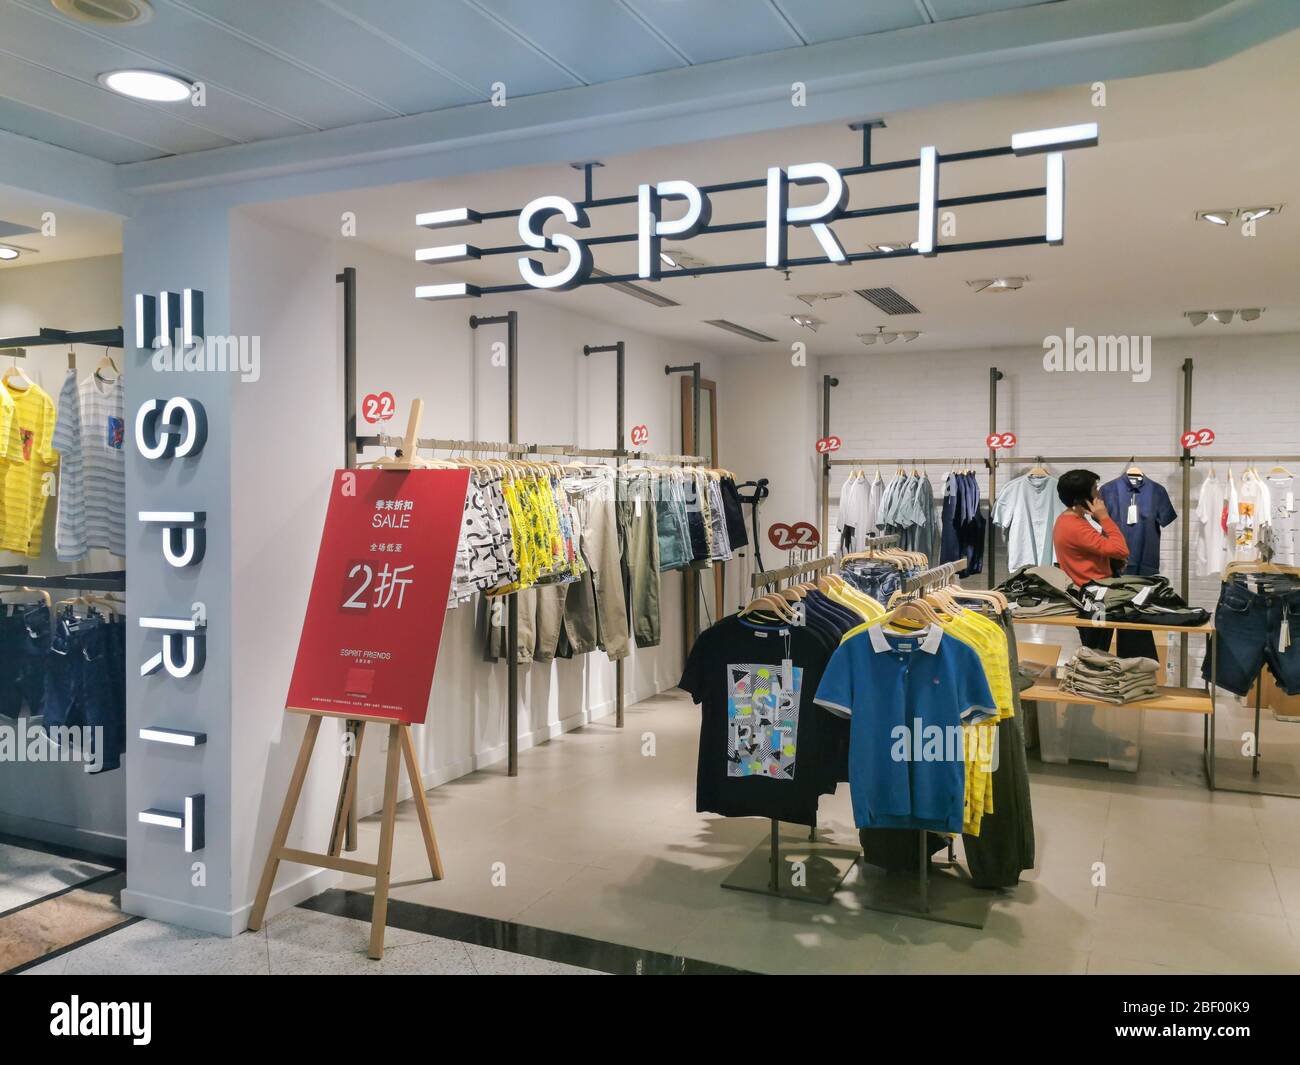 Shanghai, Shanghai, China. 16th Apr, 2020. Shanghai, CHINA-On April 16,  2020, the Esprit store located in the shopping plaza of nanjing east road  pedestrian street, Shanghai, sold all the clothes at a